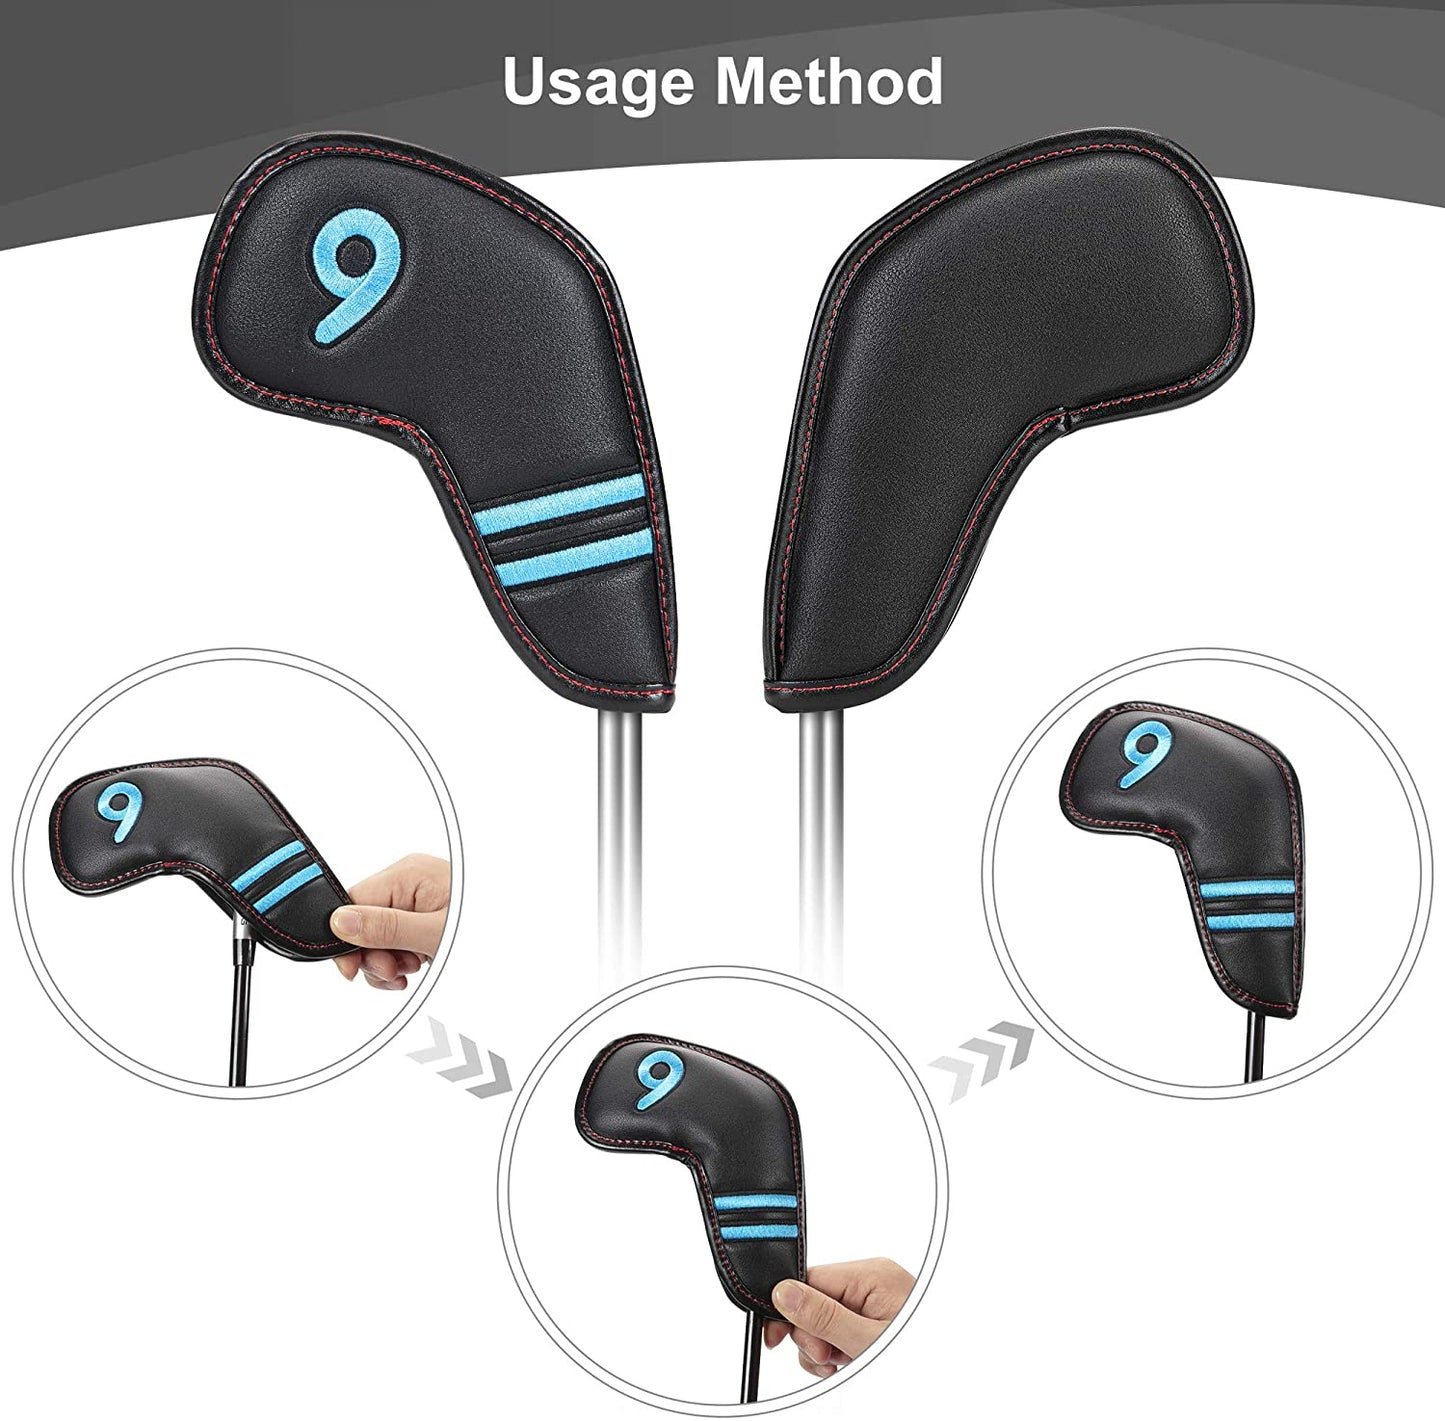 wosofe Golf Iron Covers Black Leather Head Covers Headcover 11pcs Set （4 5 6 7 8 9 Pw Aw Sw Lw X Colorful Number Embroideried PU Leather Waterproof Fit All Brands